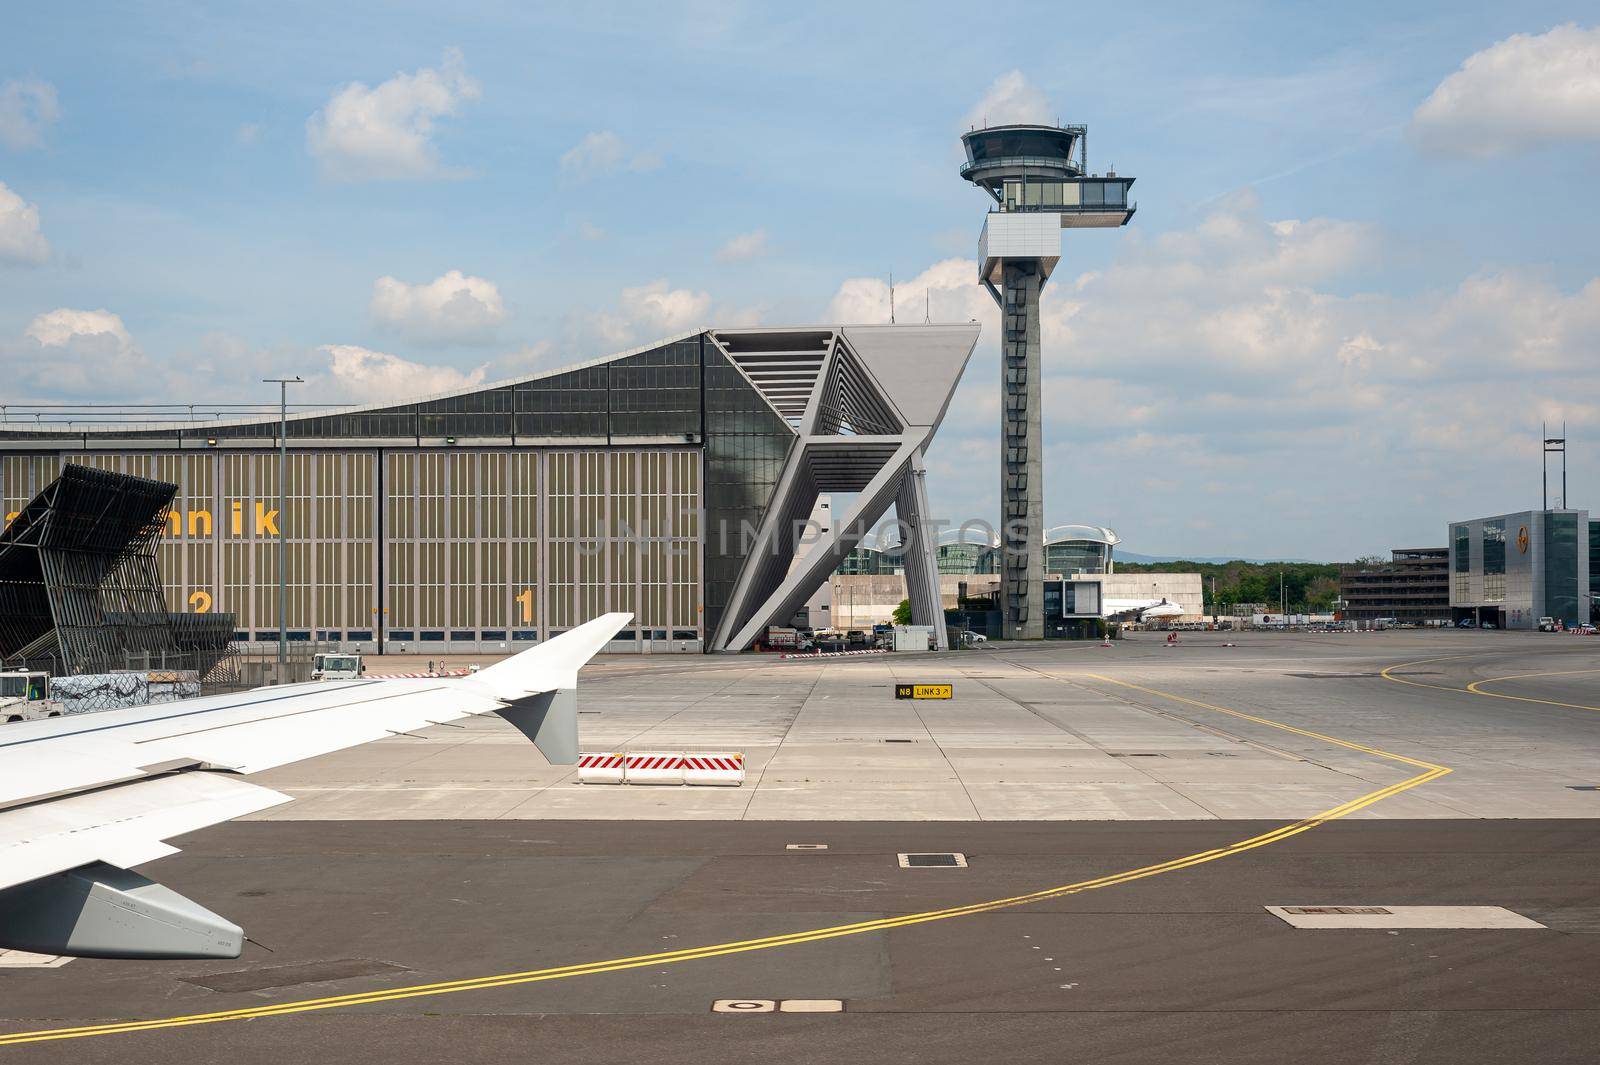 05/26/2019. Frankfurt Airport, Germany. Lufthansa Technik hangar. Operated by Fraport and serves as the main hub for Lufthansa including Lufthansa City Line and Lufthansa Cargo. by Qba